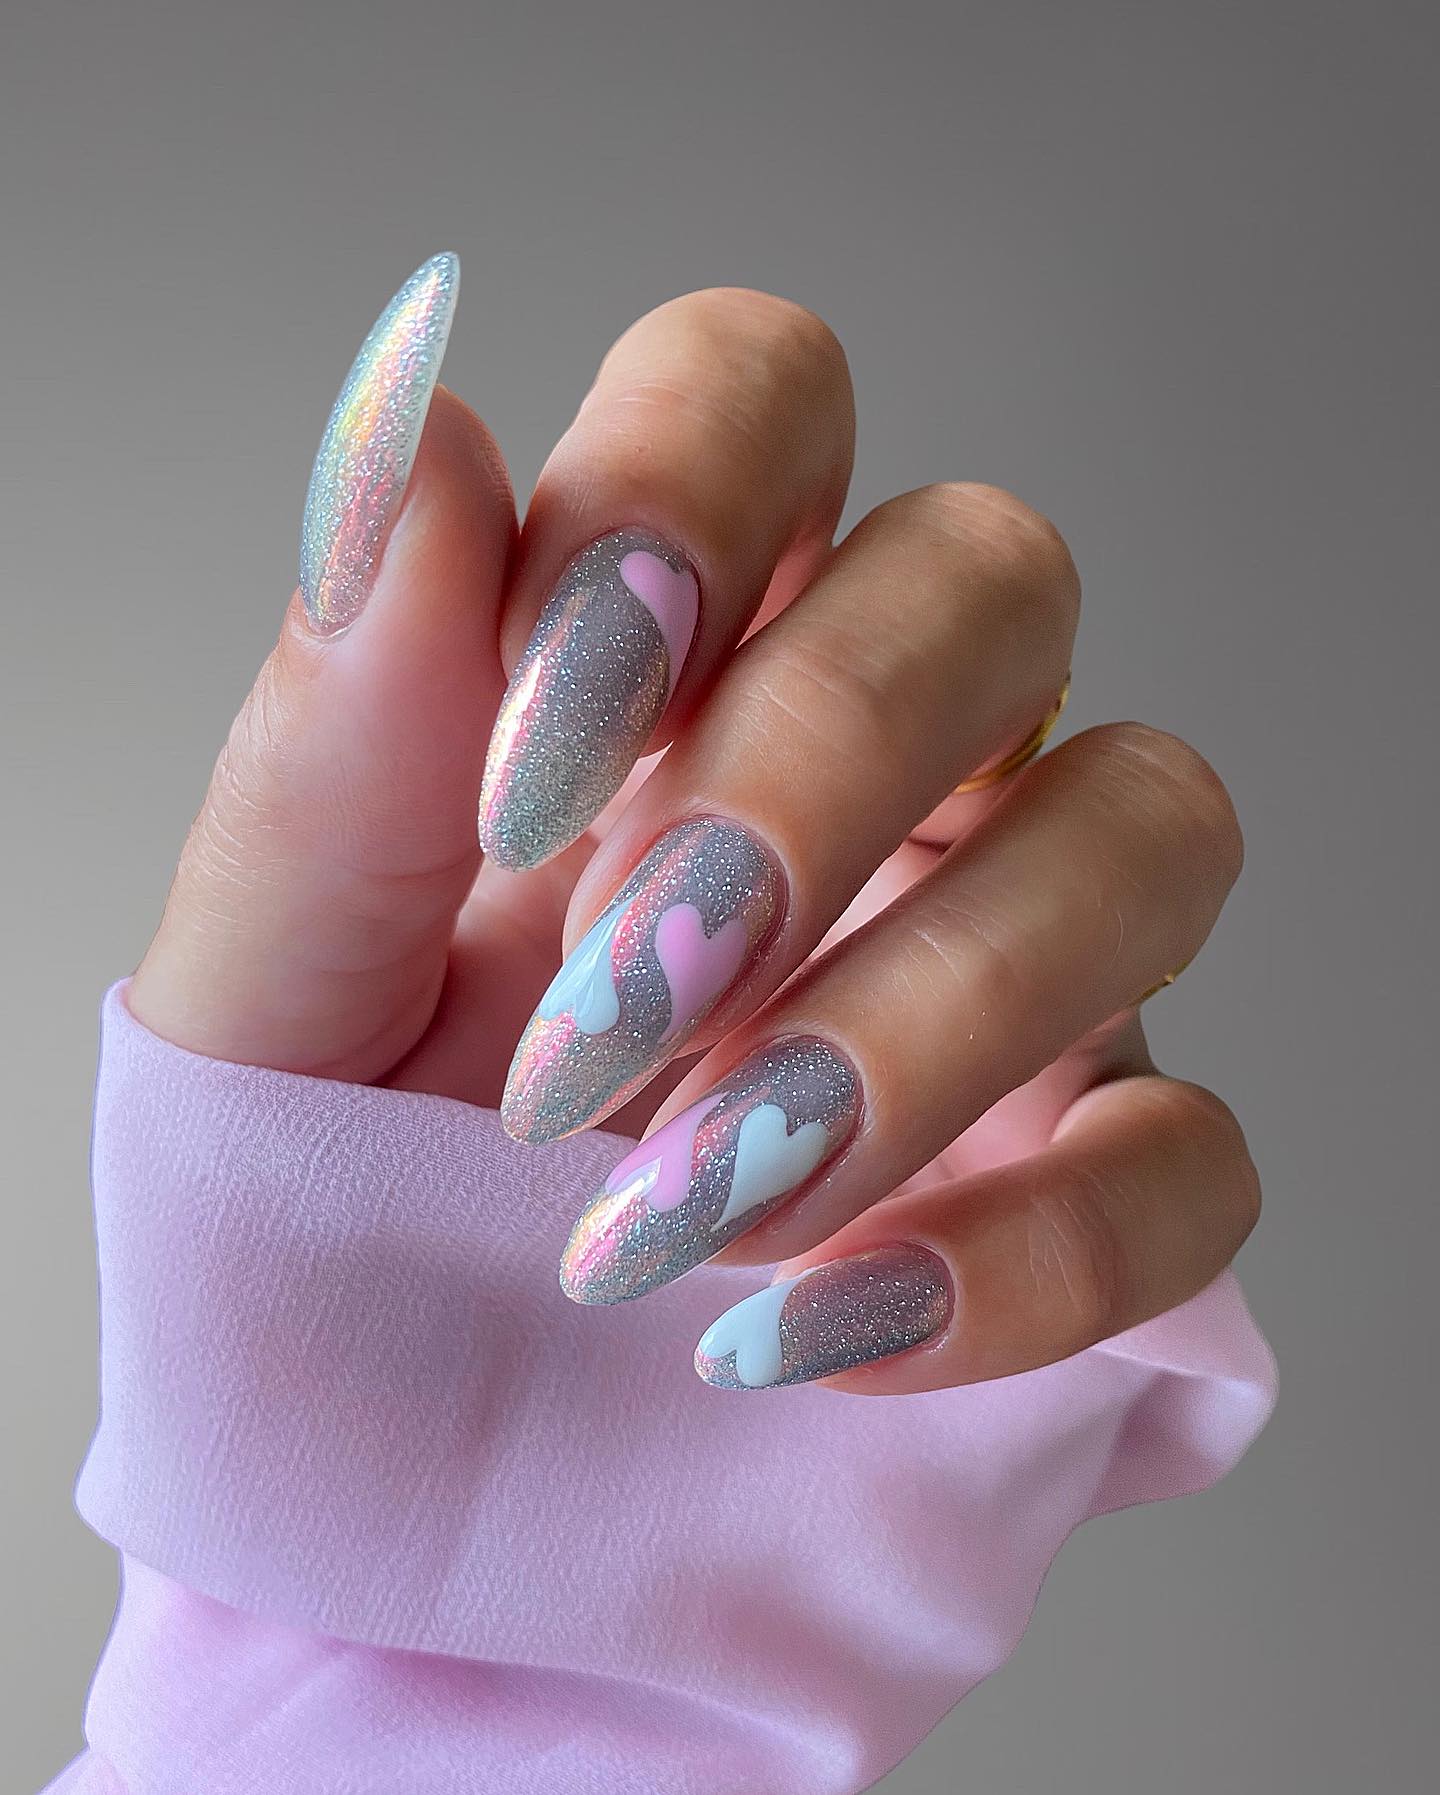 100 Of The Best Spring Inspired Nail Designs images 14